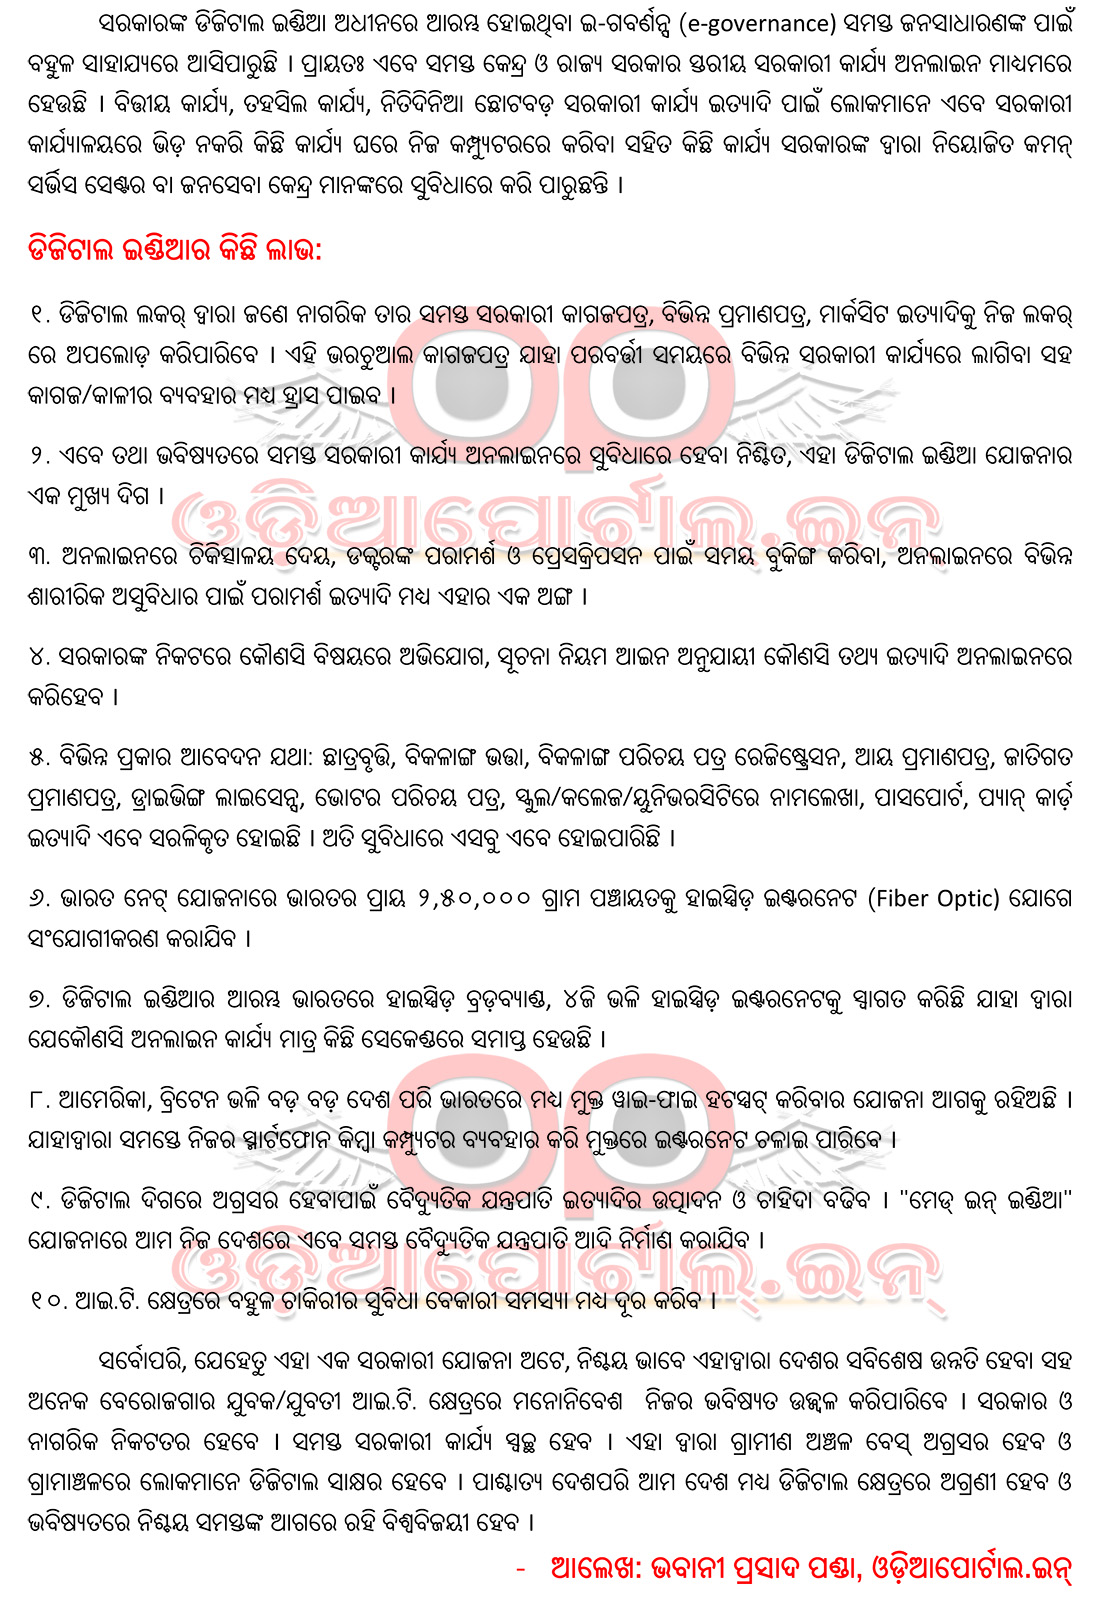 Download "Digital India (ଡିଜିଟାଲ ଇଣ୍ଡିଆ)" - Odia Essay (Rachana) For School Students [PDF], The following is the Odia Essay on Digital India for School/College Students. You can download the PDF attached in this page for offline use. 